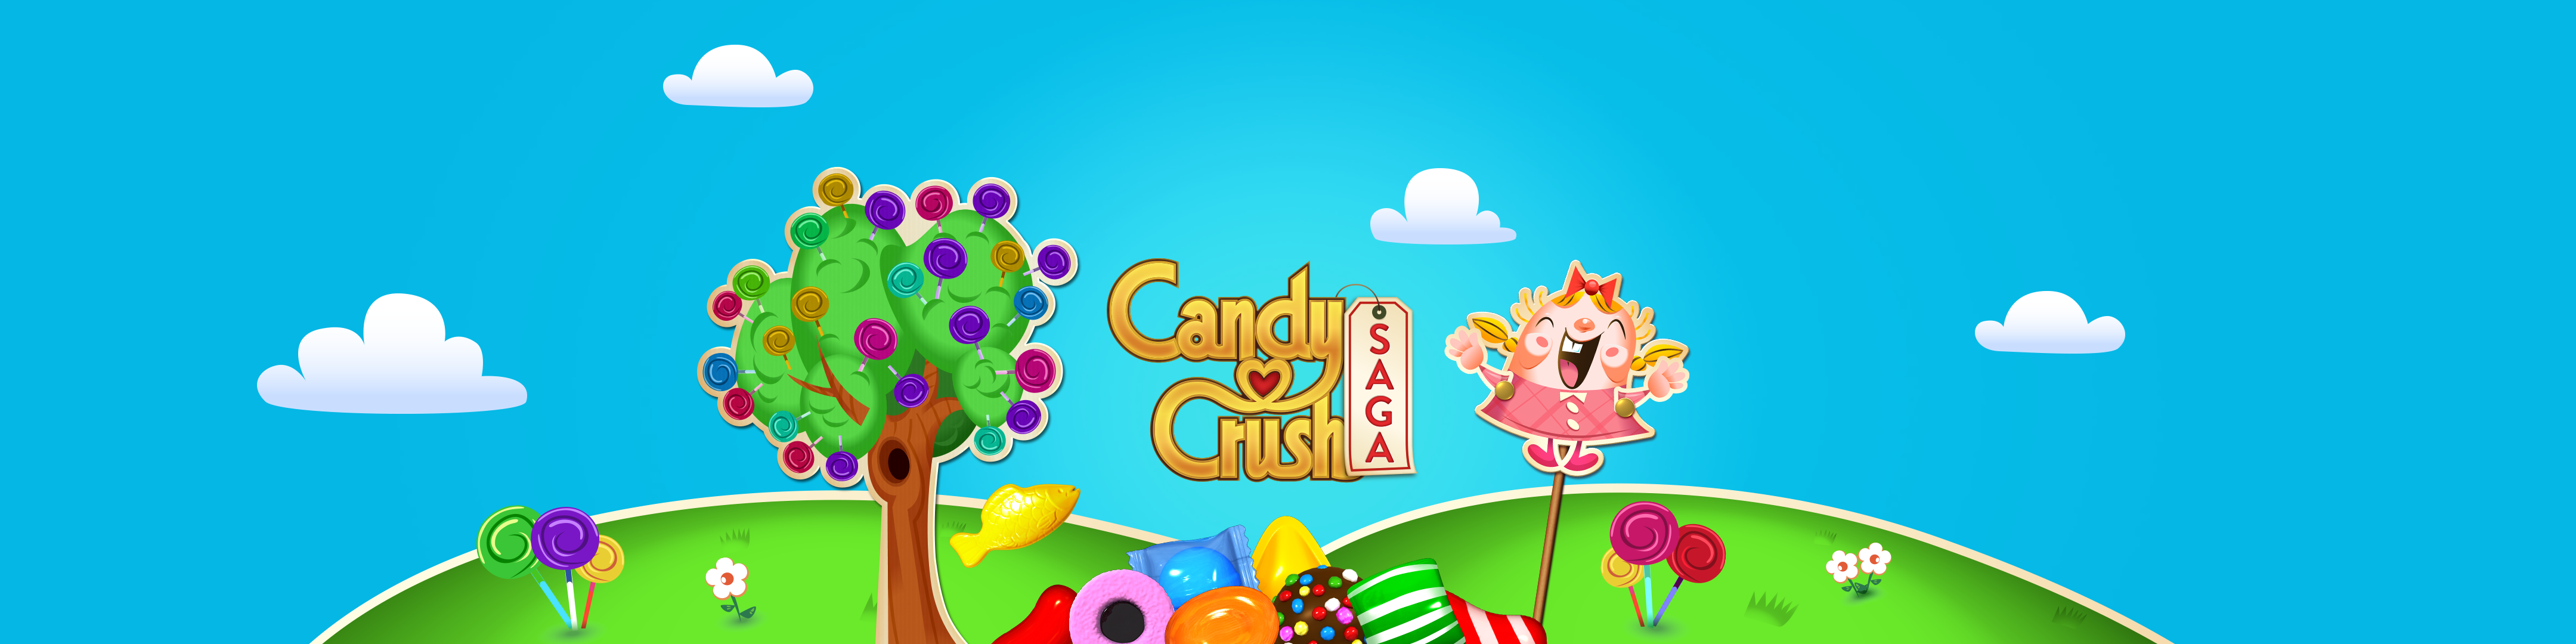 Candy Crush Saga Overview Apple App Store Us - roblox image ids of candy